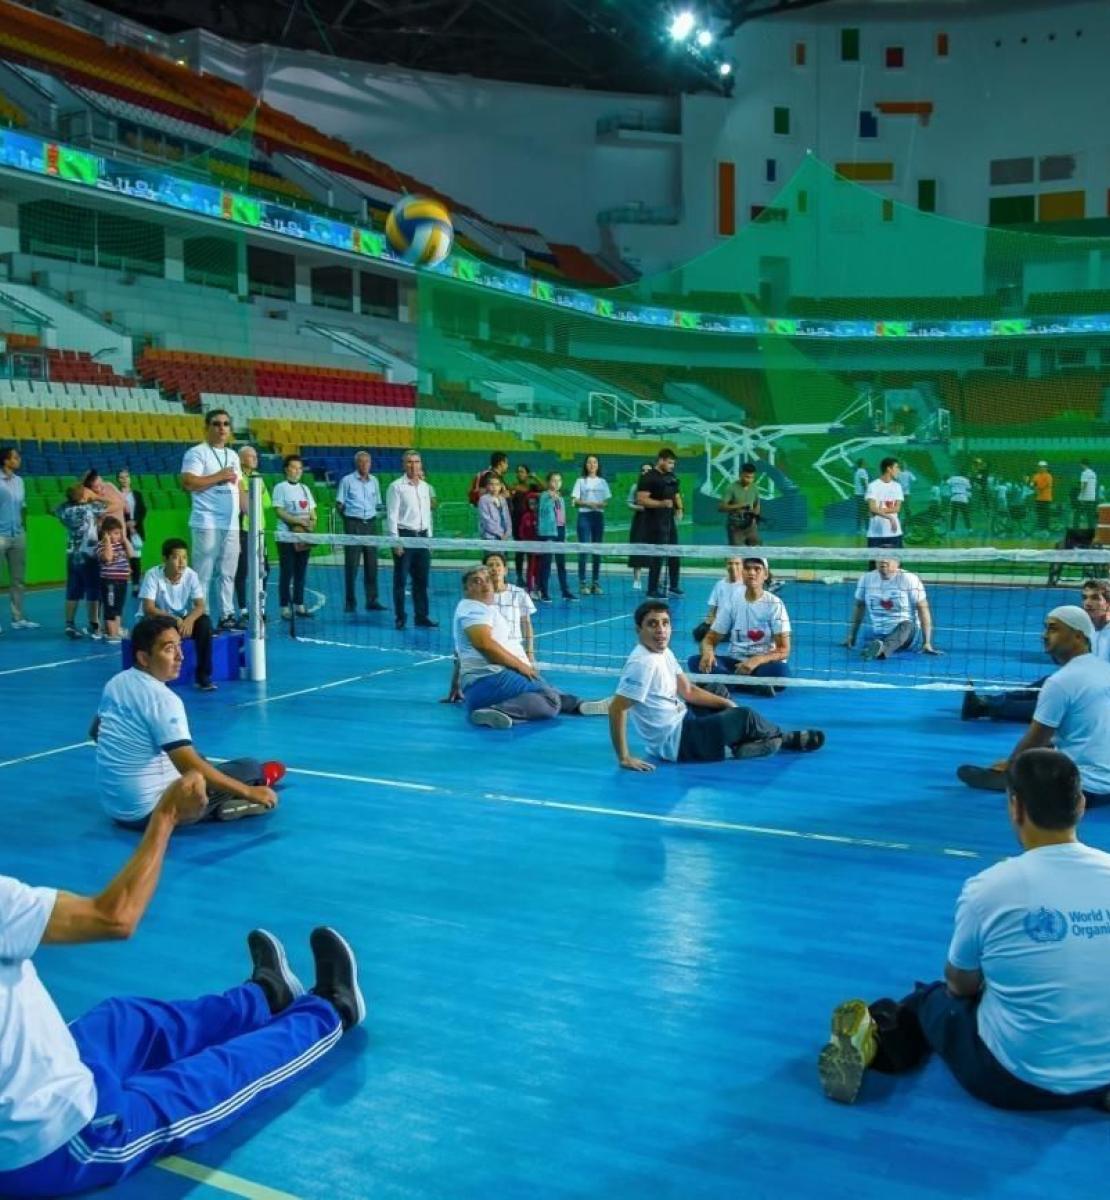 Players with disabilities playing volleyball. 